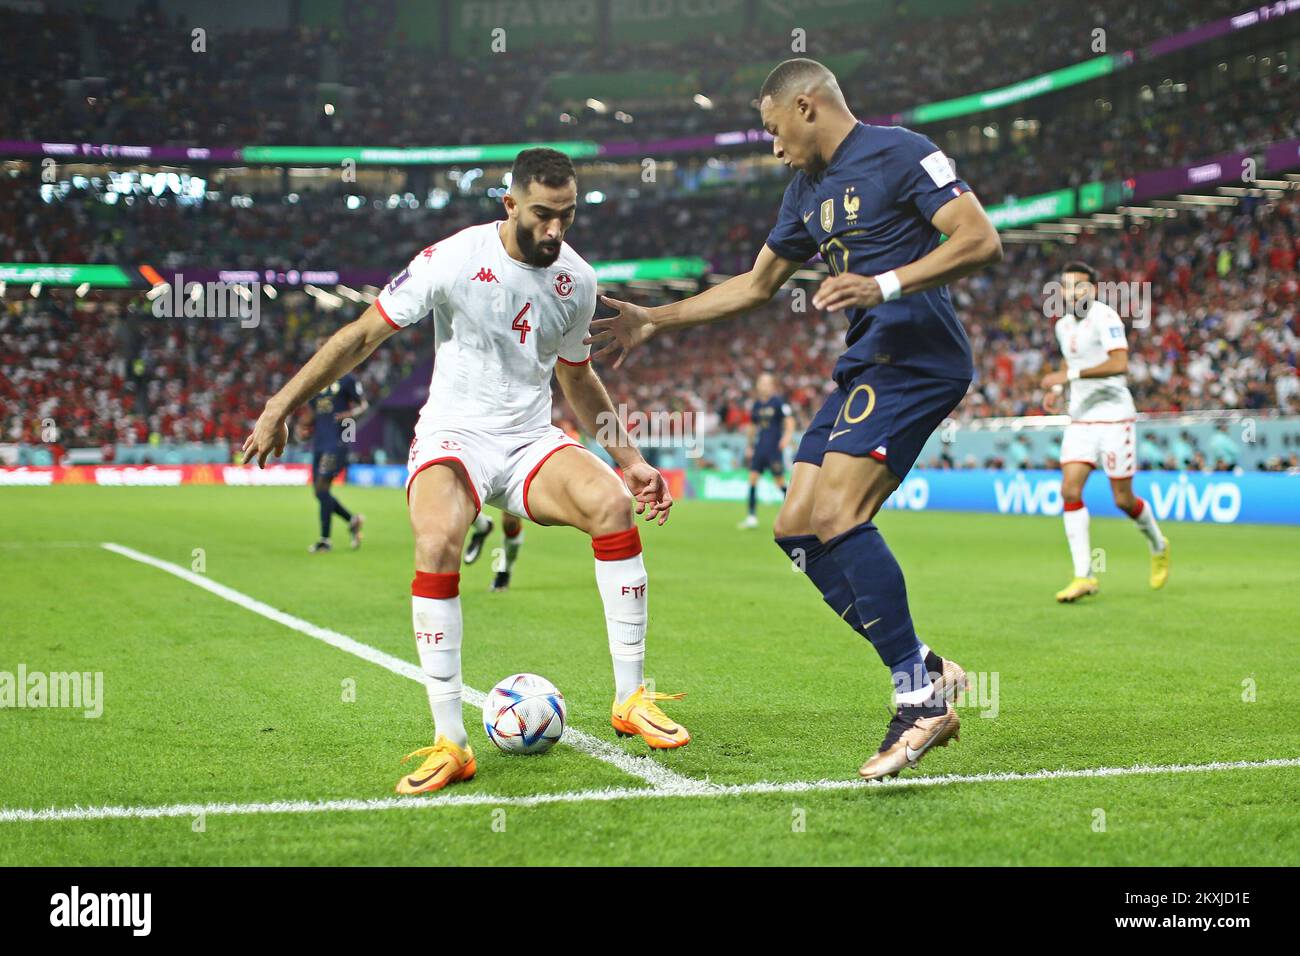 Doha, Qatar. 30th Nov, 2022. Yassine Meriah of Tunisia disputes the bid with Kylian Mbappe of France, during the match between Tunisia and France, for the 3rd round of Group D of the FIFA World Cup Qatar 2022, Education City Stadium this Wednesday 30. 30761 (Heuler Andrey/SPP) Credit: SPP Sport Press Photo. /Alamy Live News Stock Photo